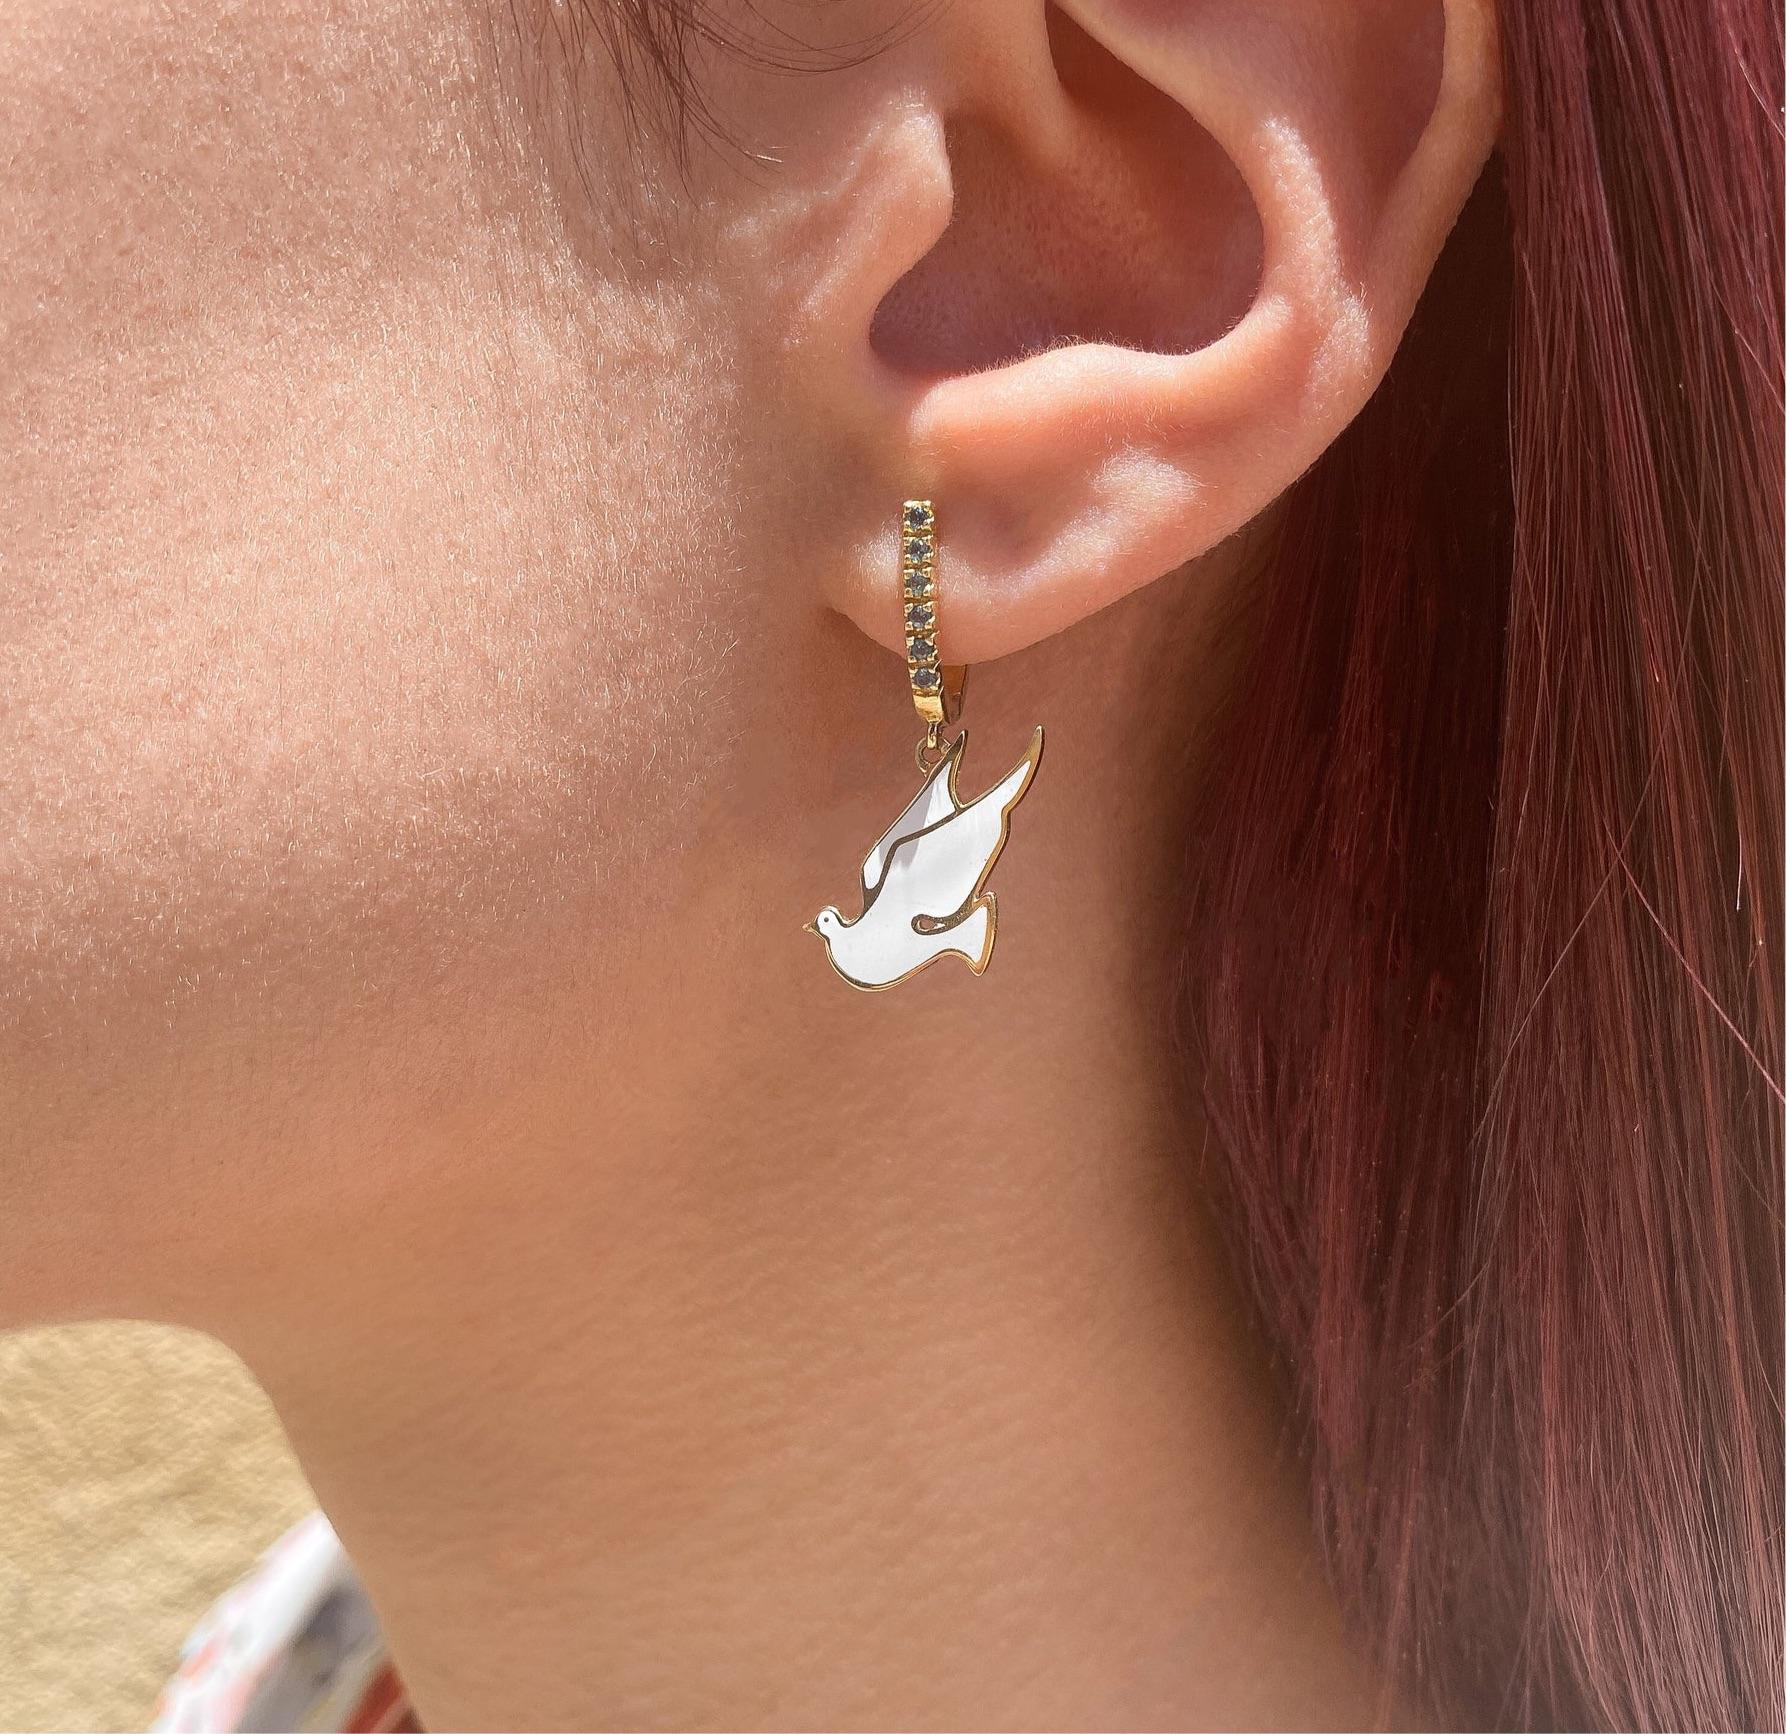 The Flying Dove, ear pendants are crafted in 18K yellow gold, hallmarked in Cyprus. These elegant ear pendants come in a highly polished finish and feature 0.2 cts of London Blue Topazes and white enamel, making them classy.  Being very comfortable